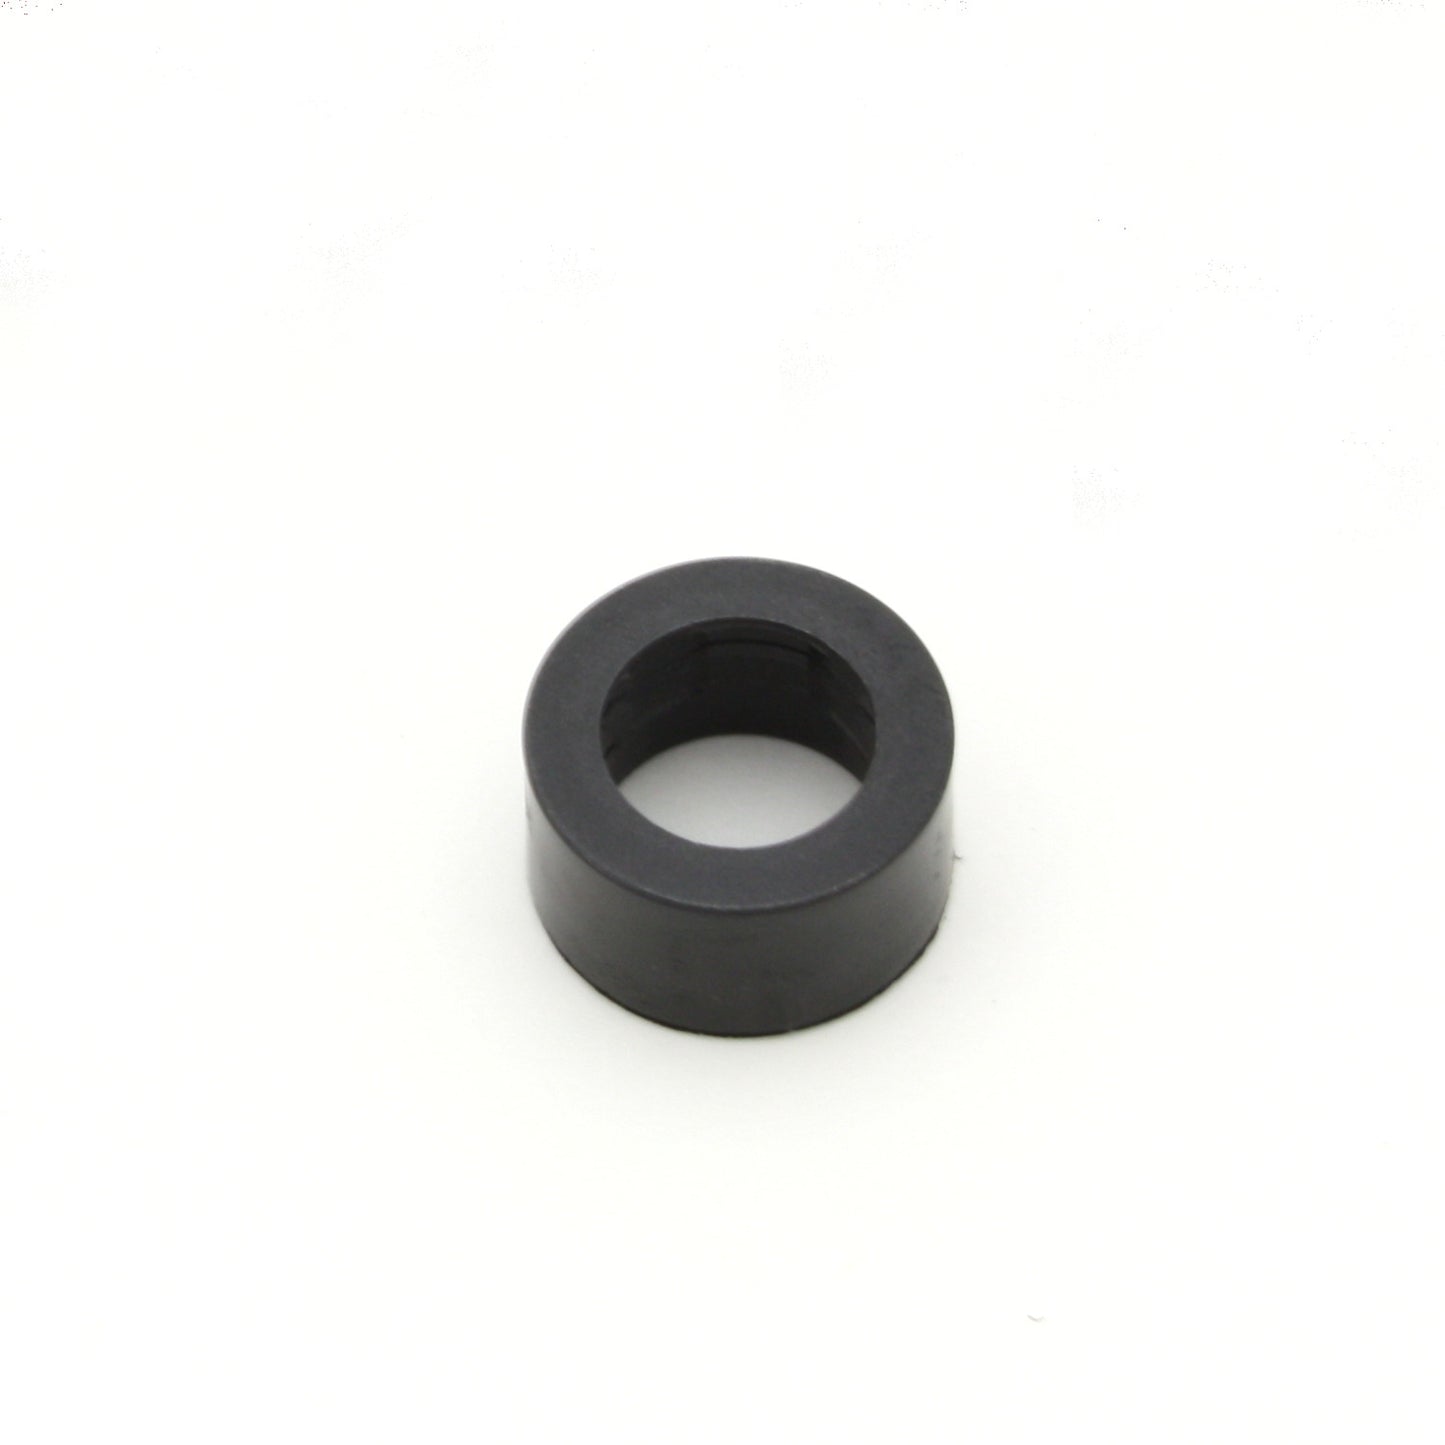 PerTronix SV-1413 Magnet Sleeve (only) for SV-141 Ignitor Kit